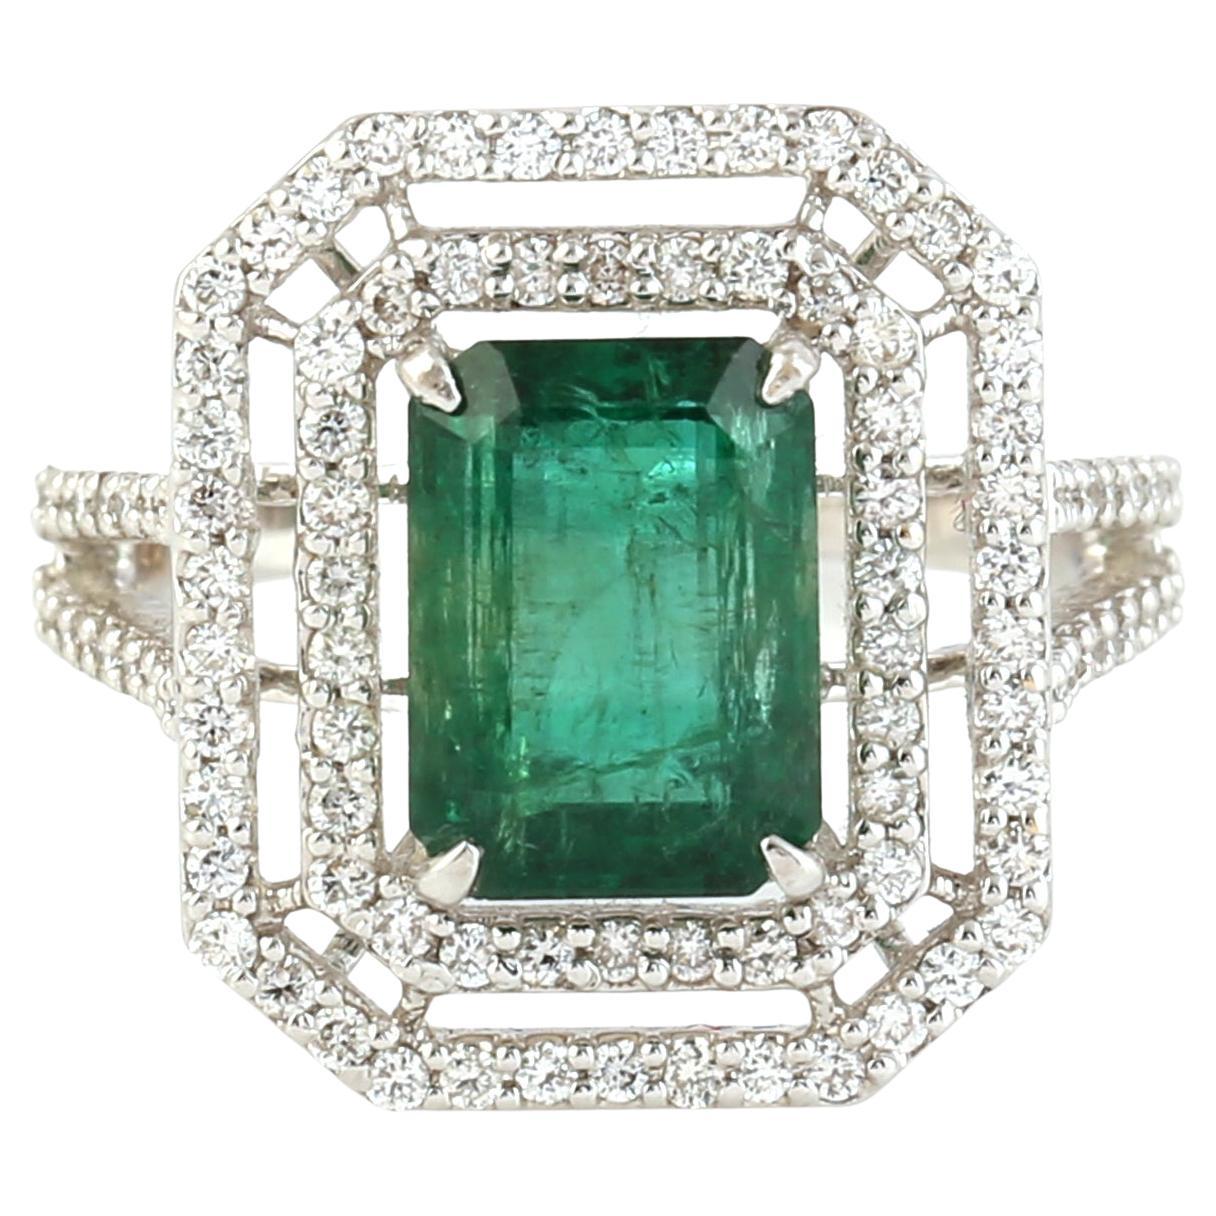 Octogen Cut Zambian Emerald Ring with Diamonds Made in 14k White Gold